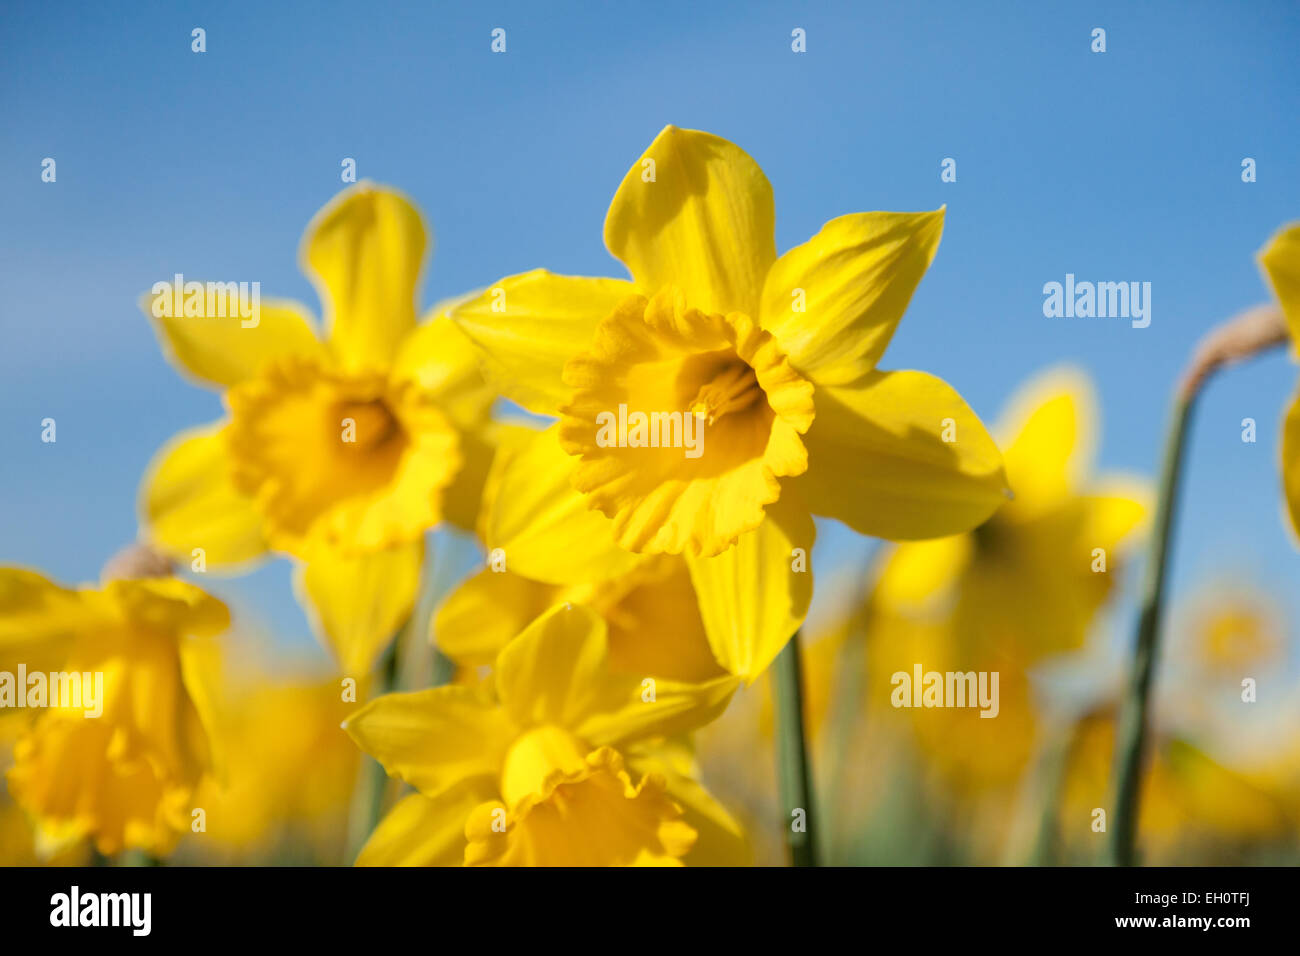 Daffodil flowers blooming in a field at the start of the annual La Conner Daffodil Festival in La Conner Washington, USA. Stock Photo